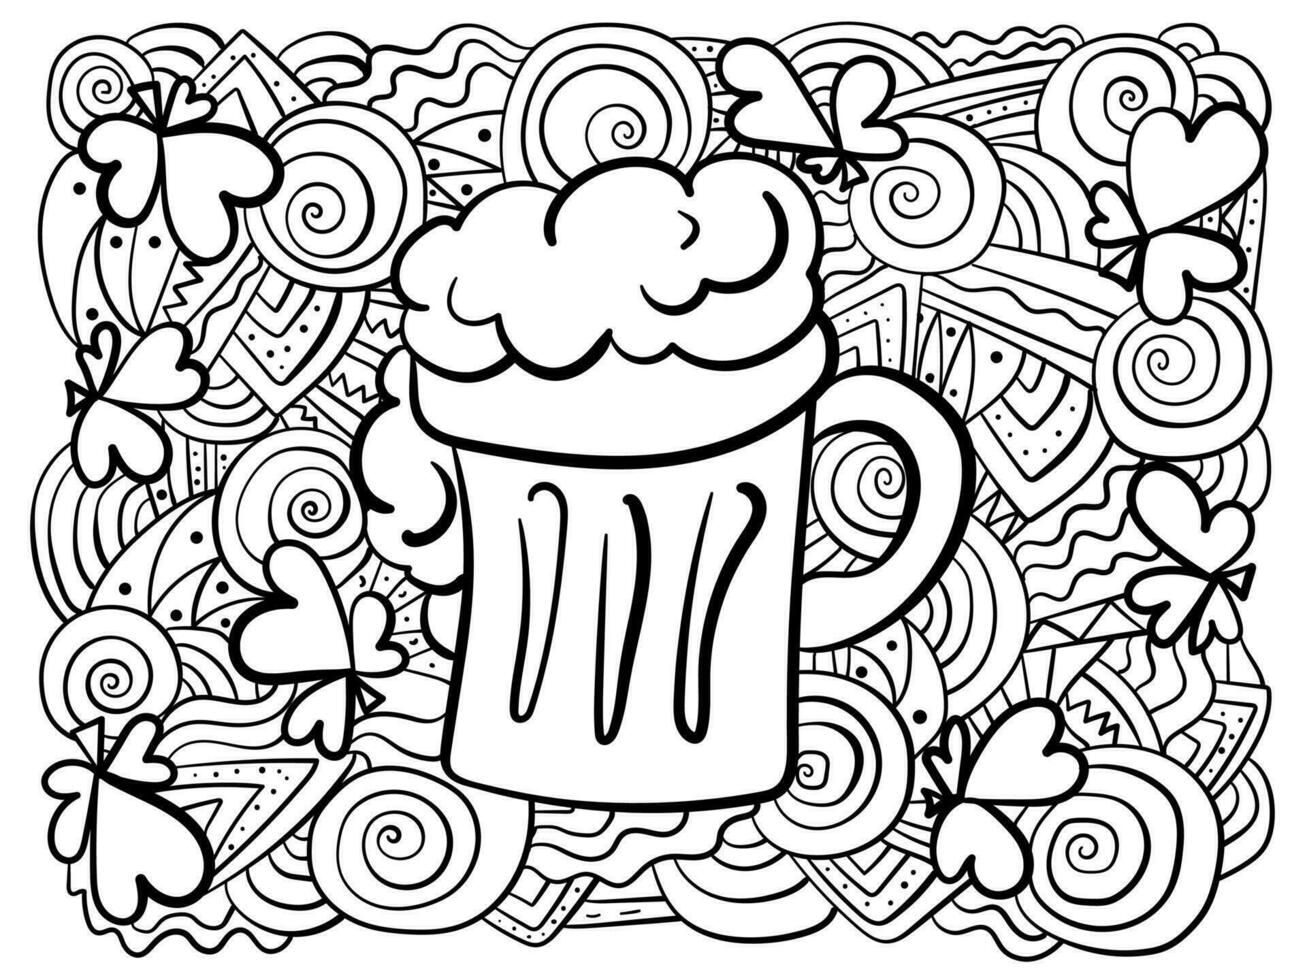 Meditative horizontal coloring page with a glass of beer, clover shamrocks and ornate patterns for activity vector